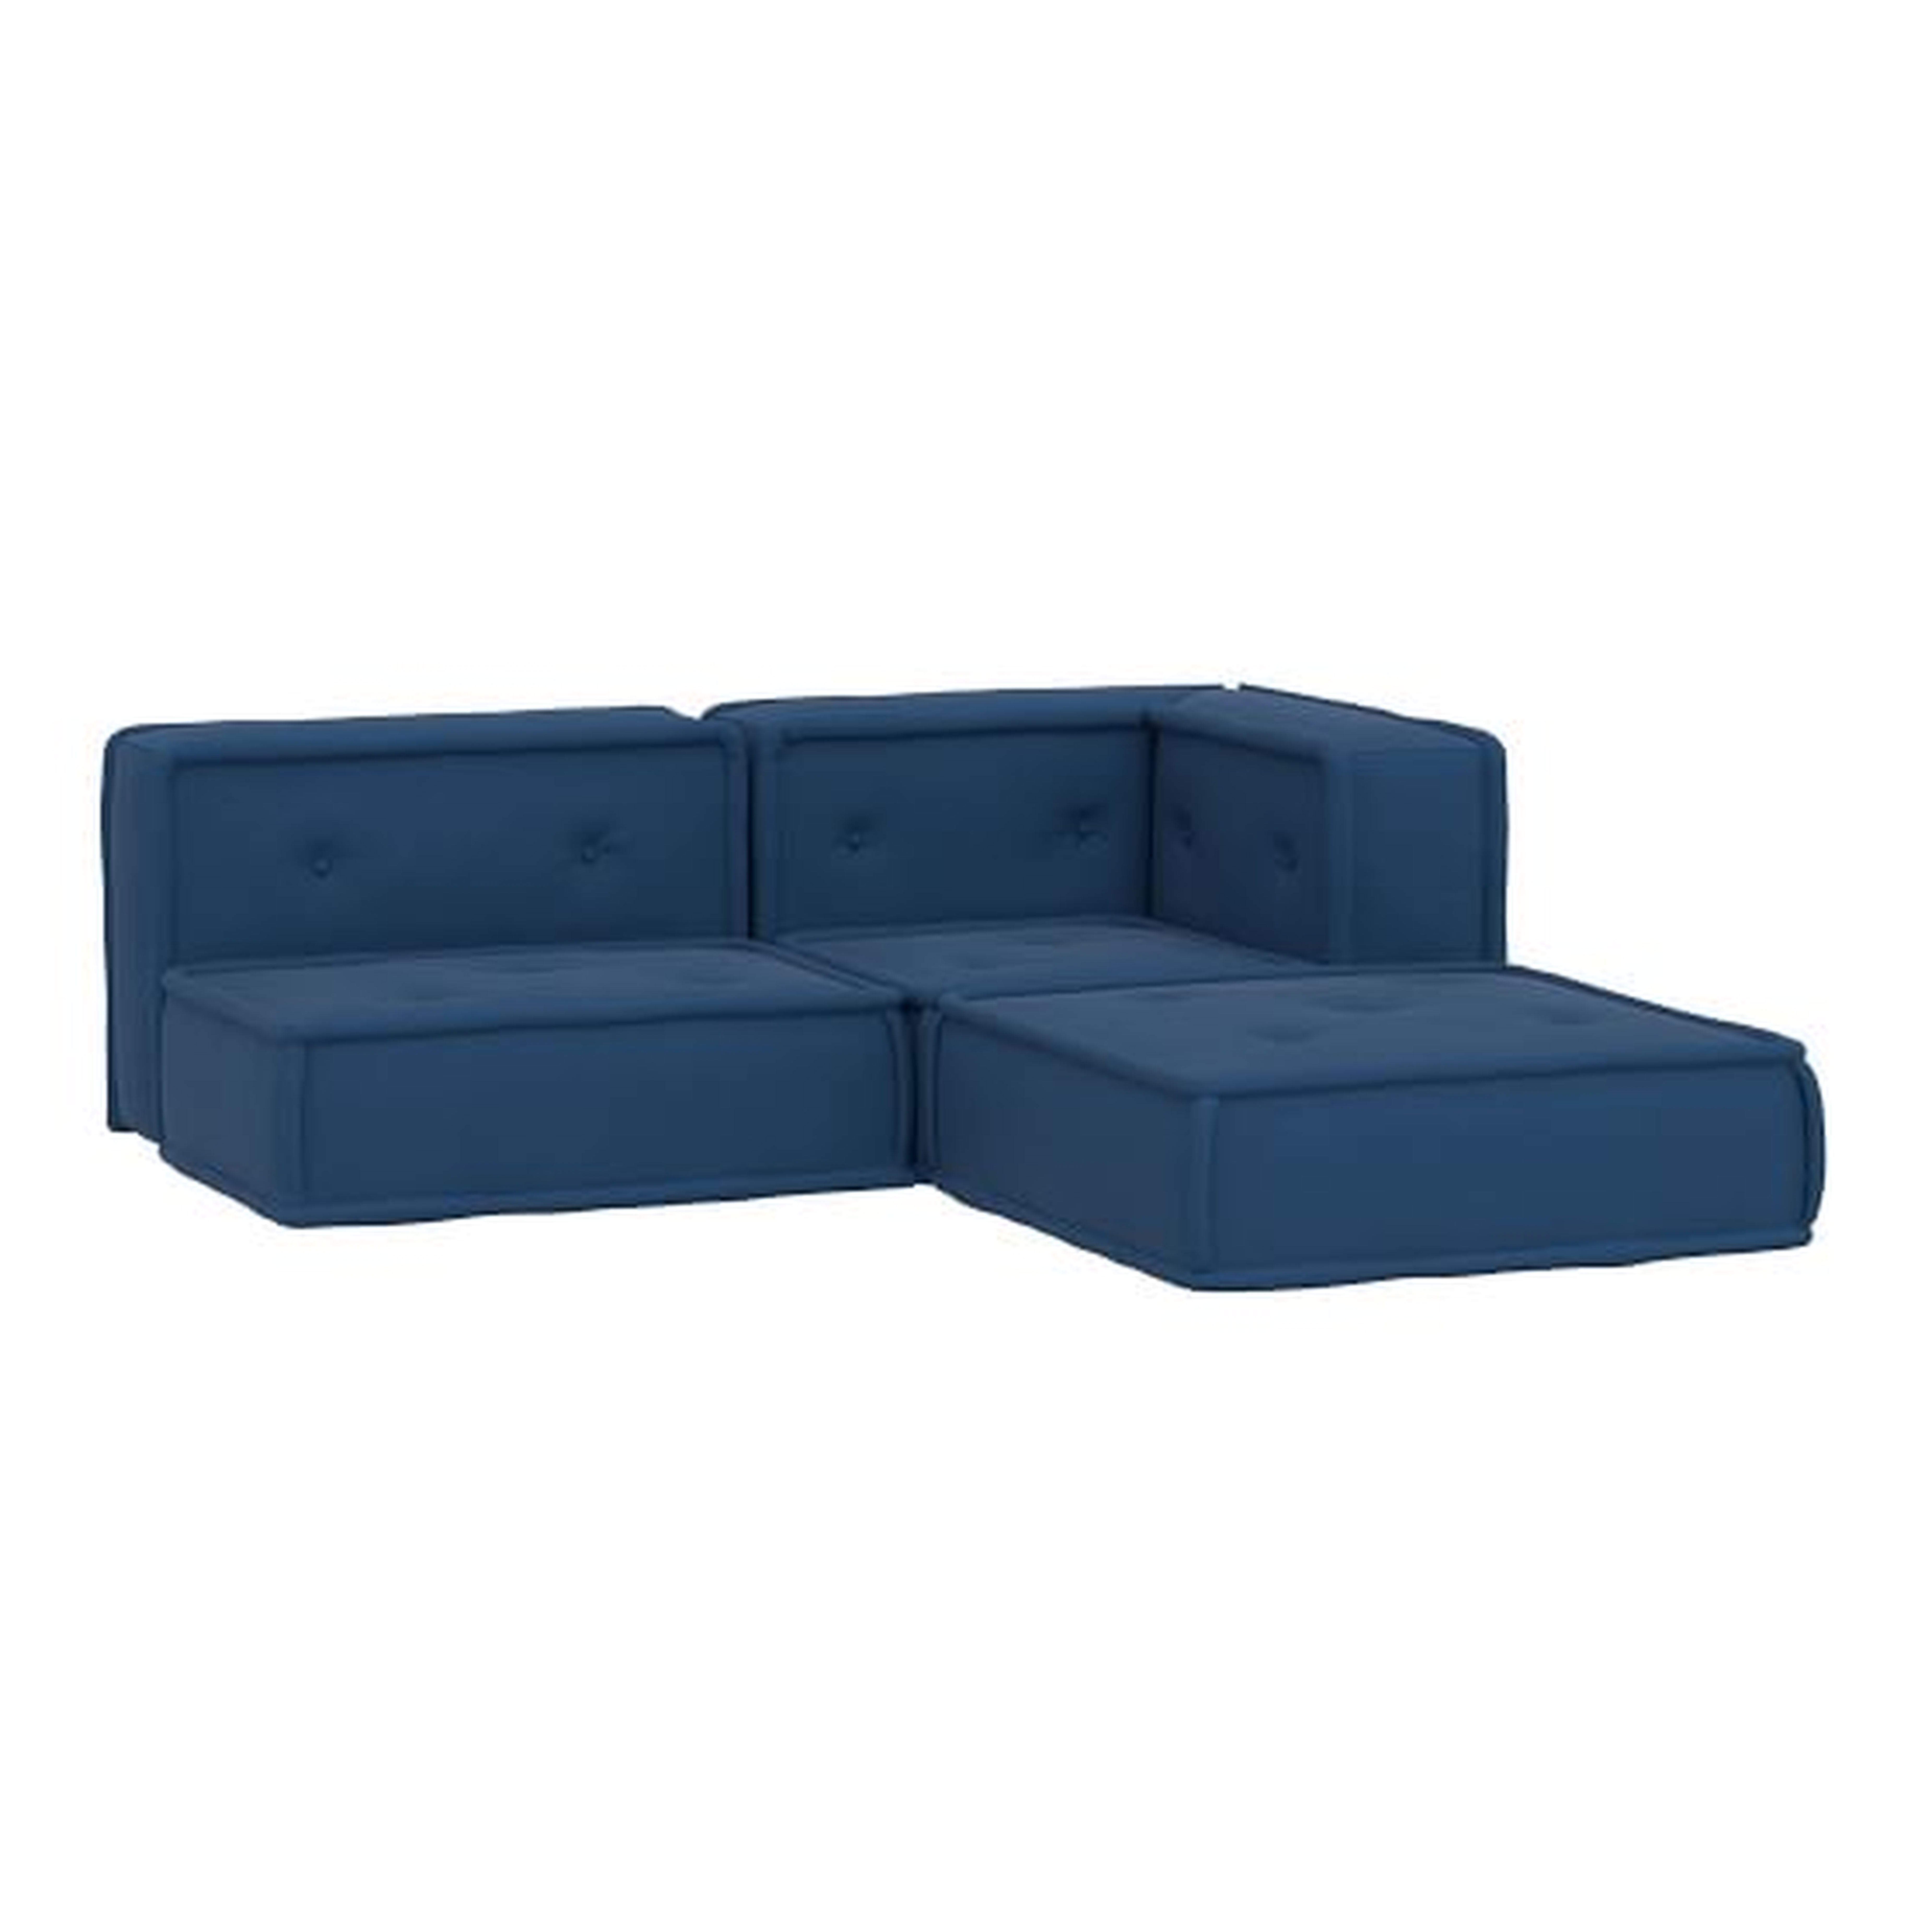 Cushy Lounge Sectional Set, Navy Faux-Suede, Flat Rate - Pottery Barn Kids